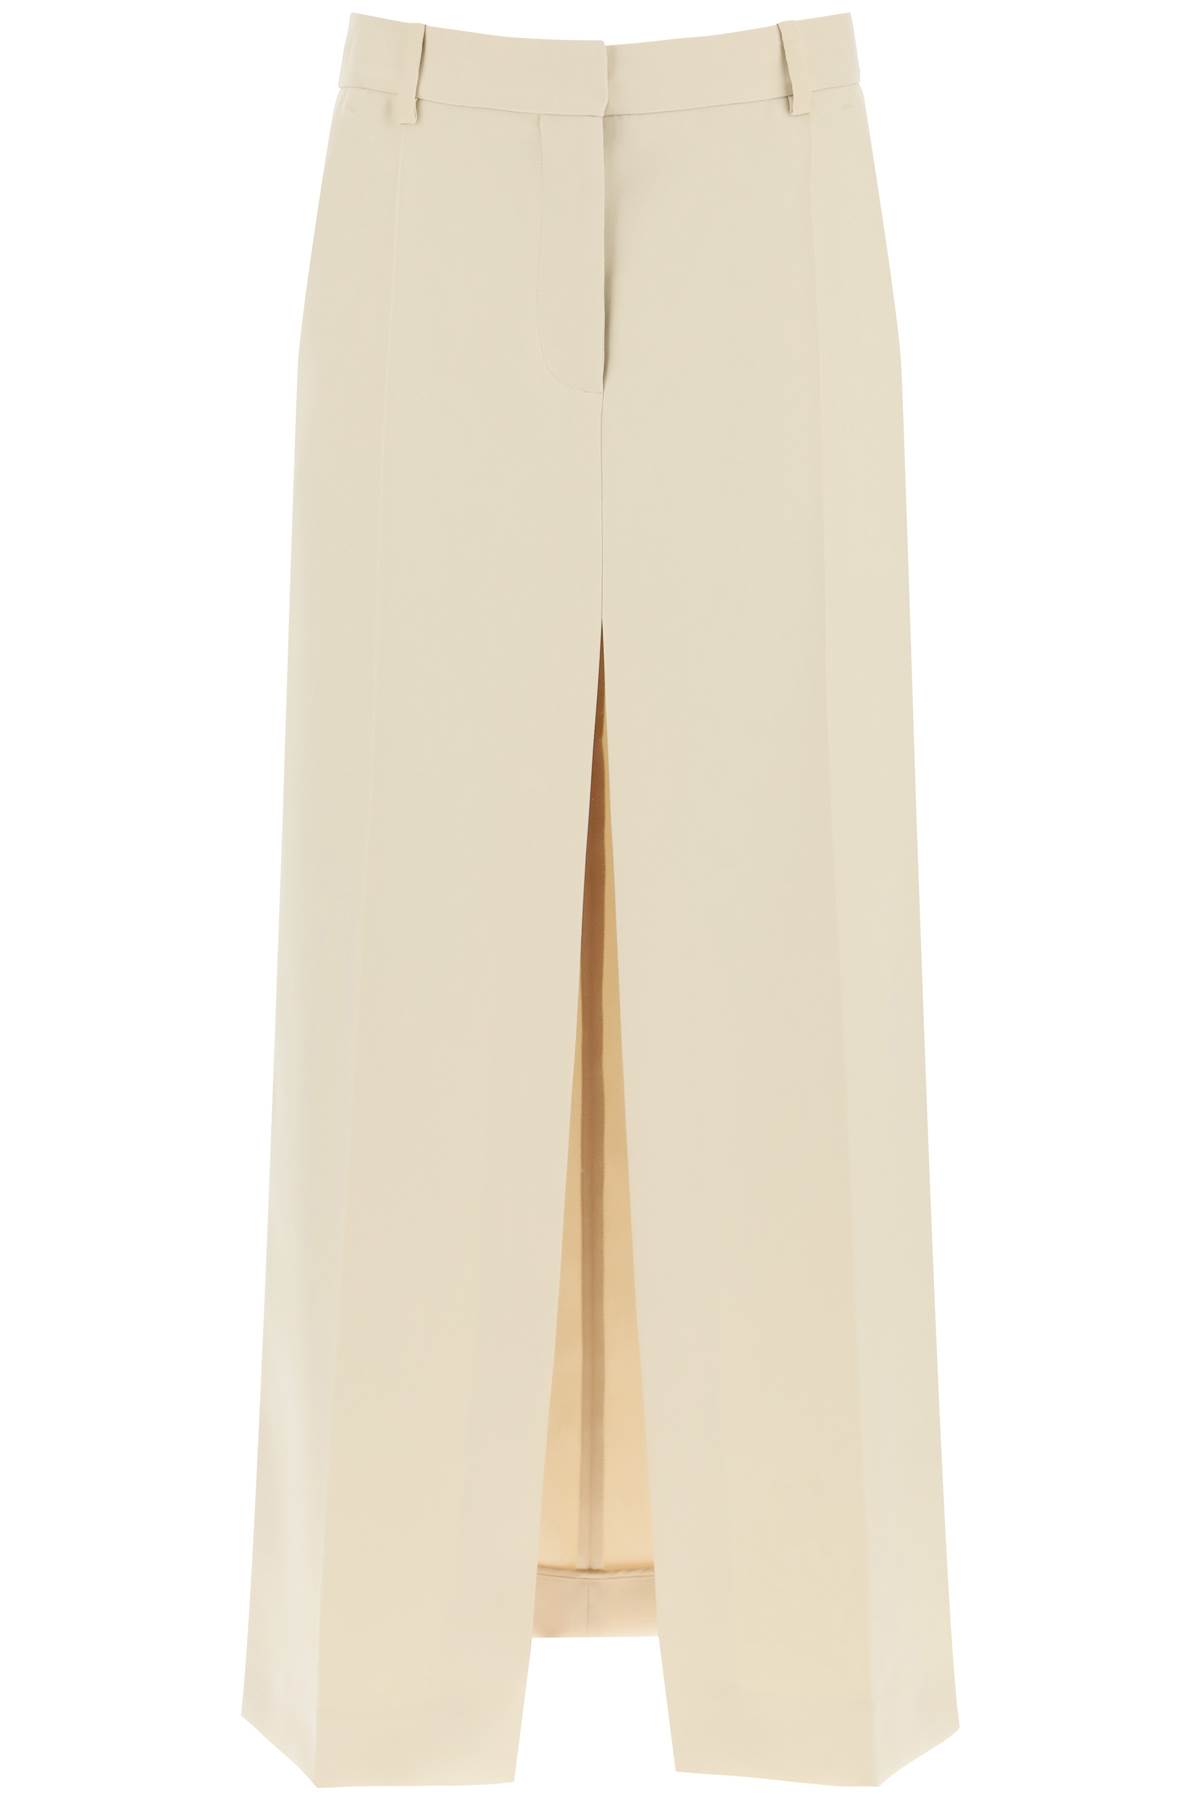 STELLA MCCARTNEY MAXI SKIRT IN RECYCLED POLYESTER